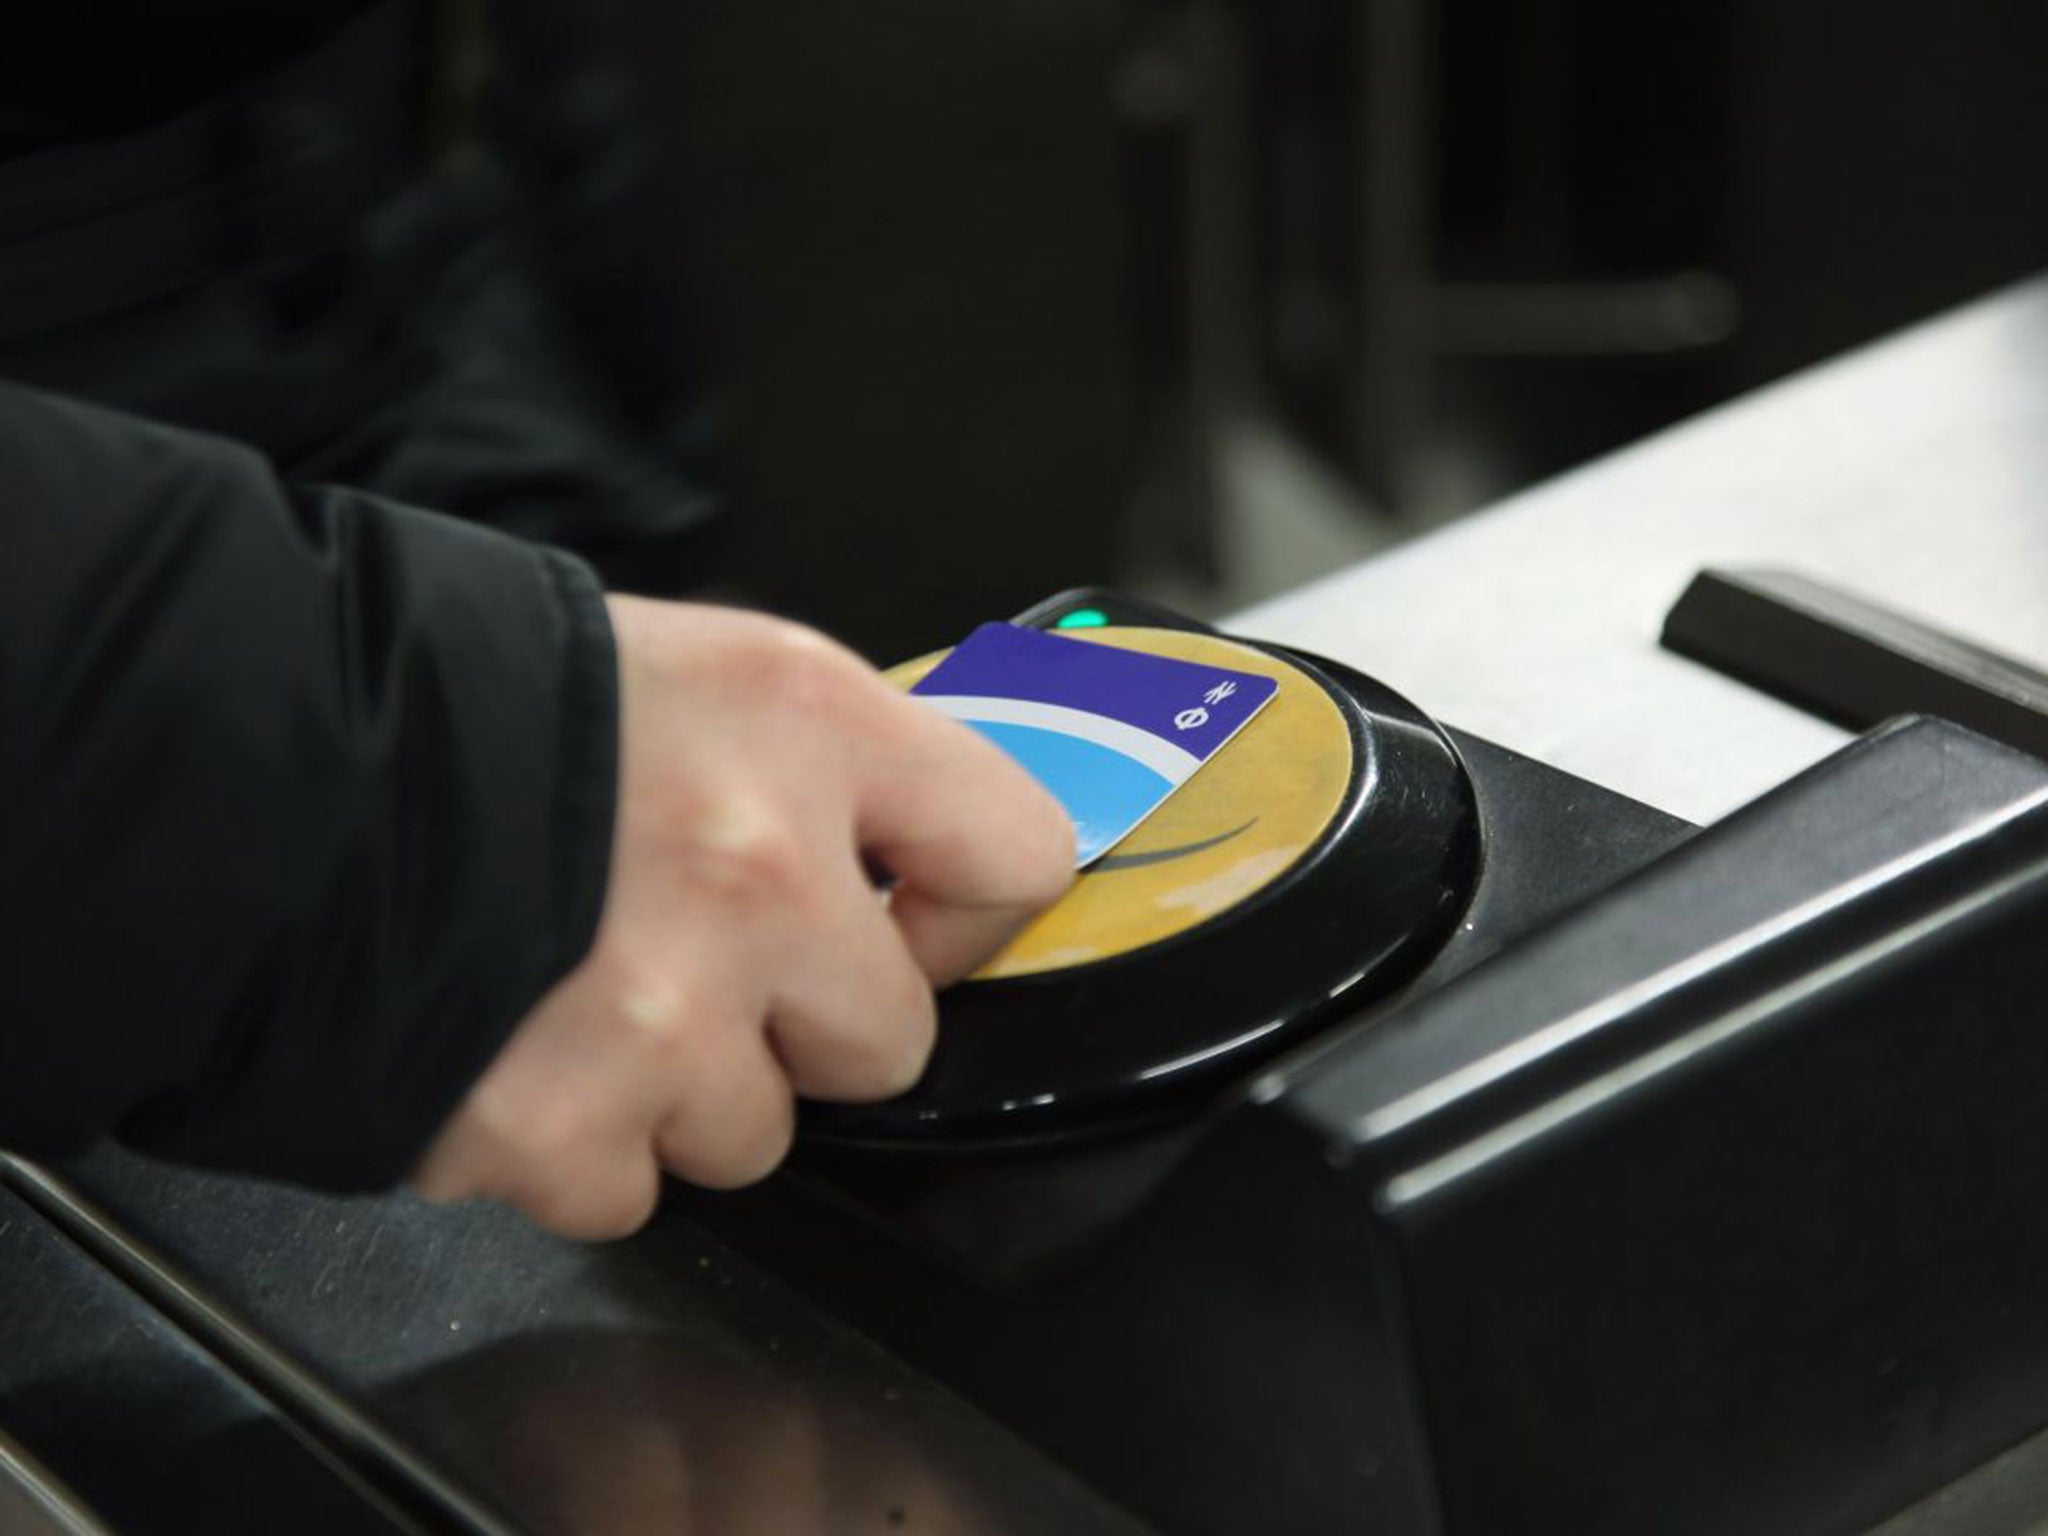 The Oyster card system, replacing cash payment, is to be duplicated across the UK